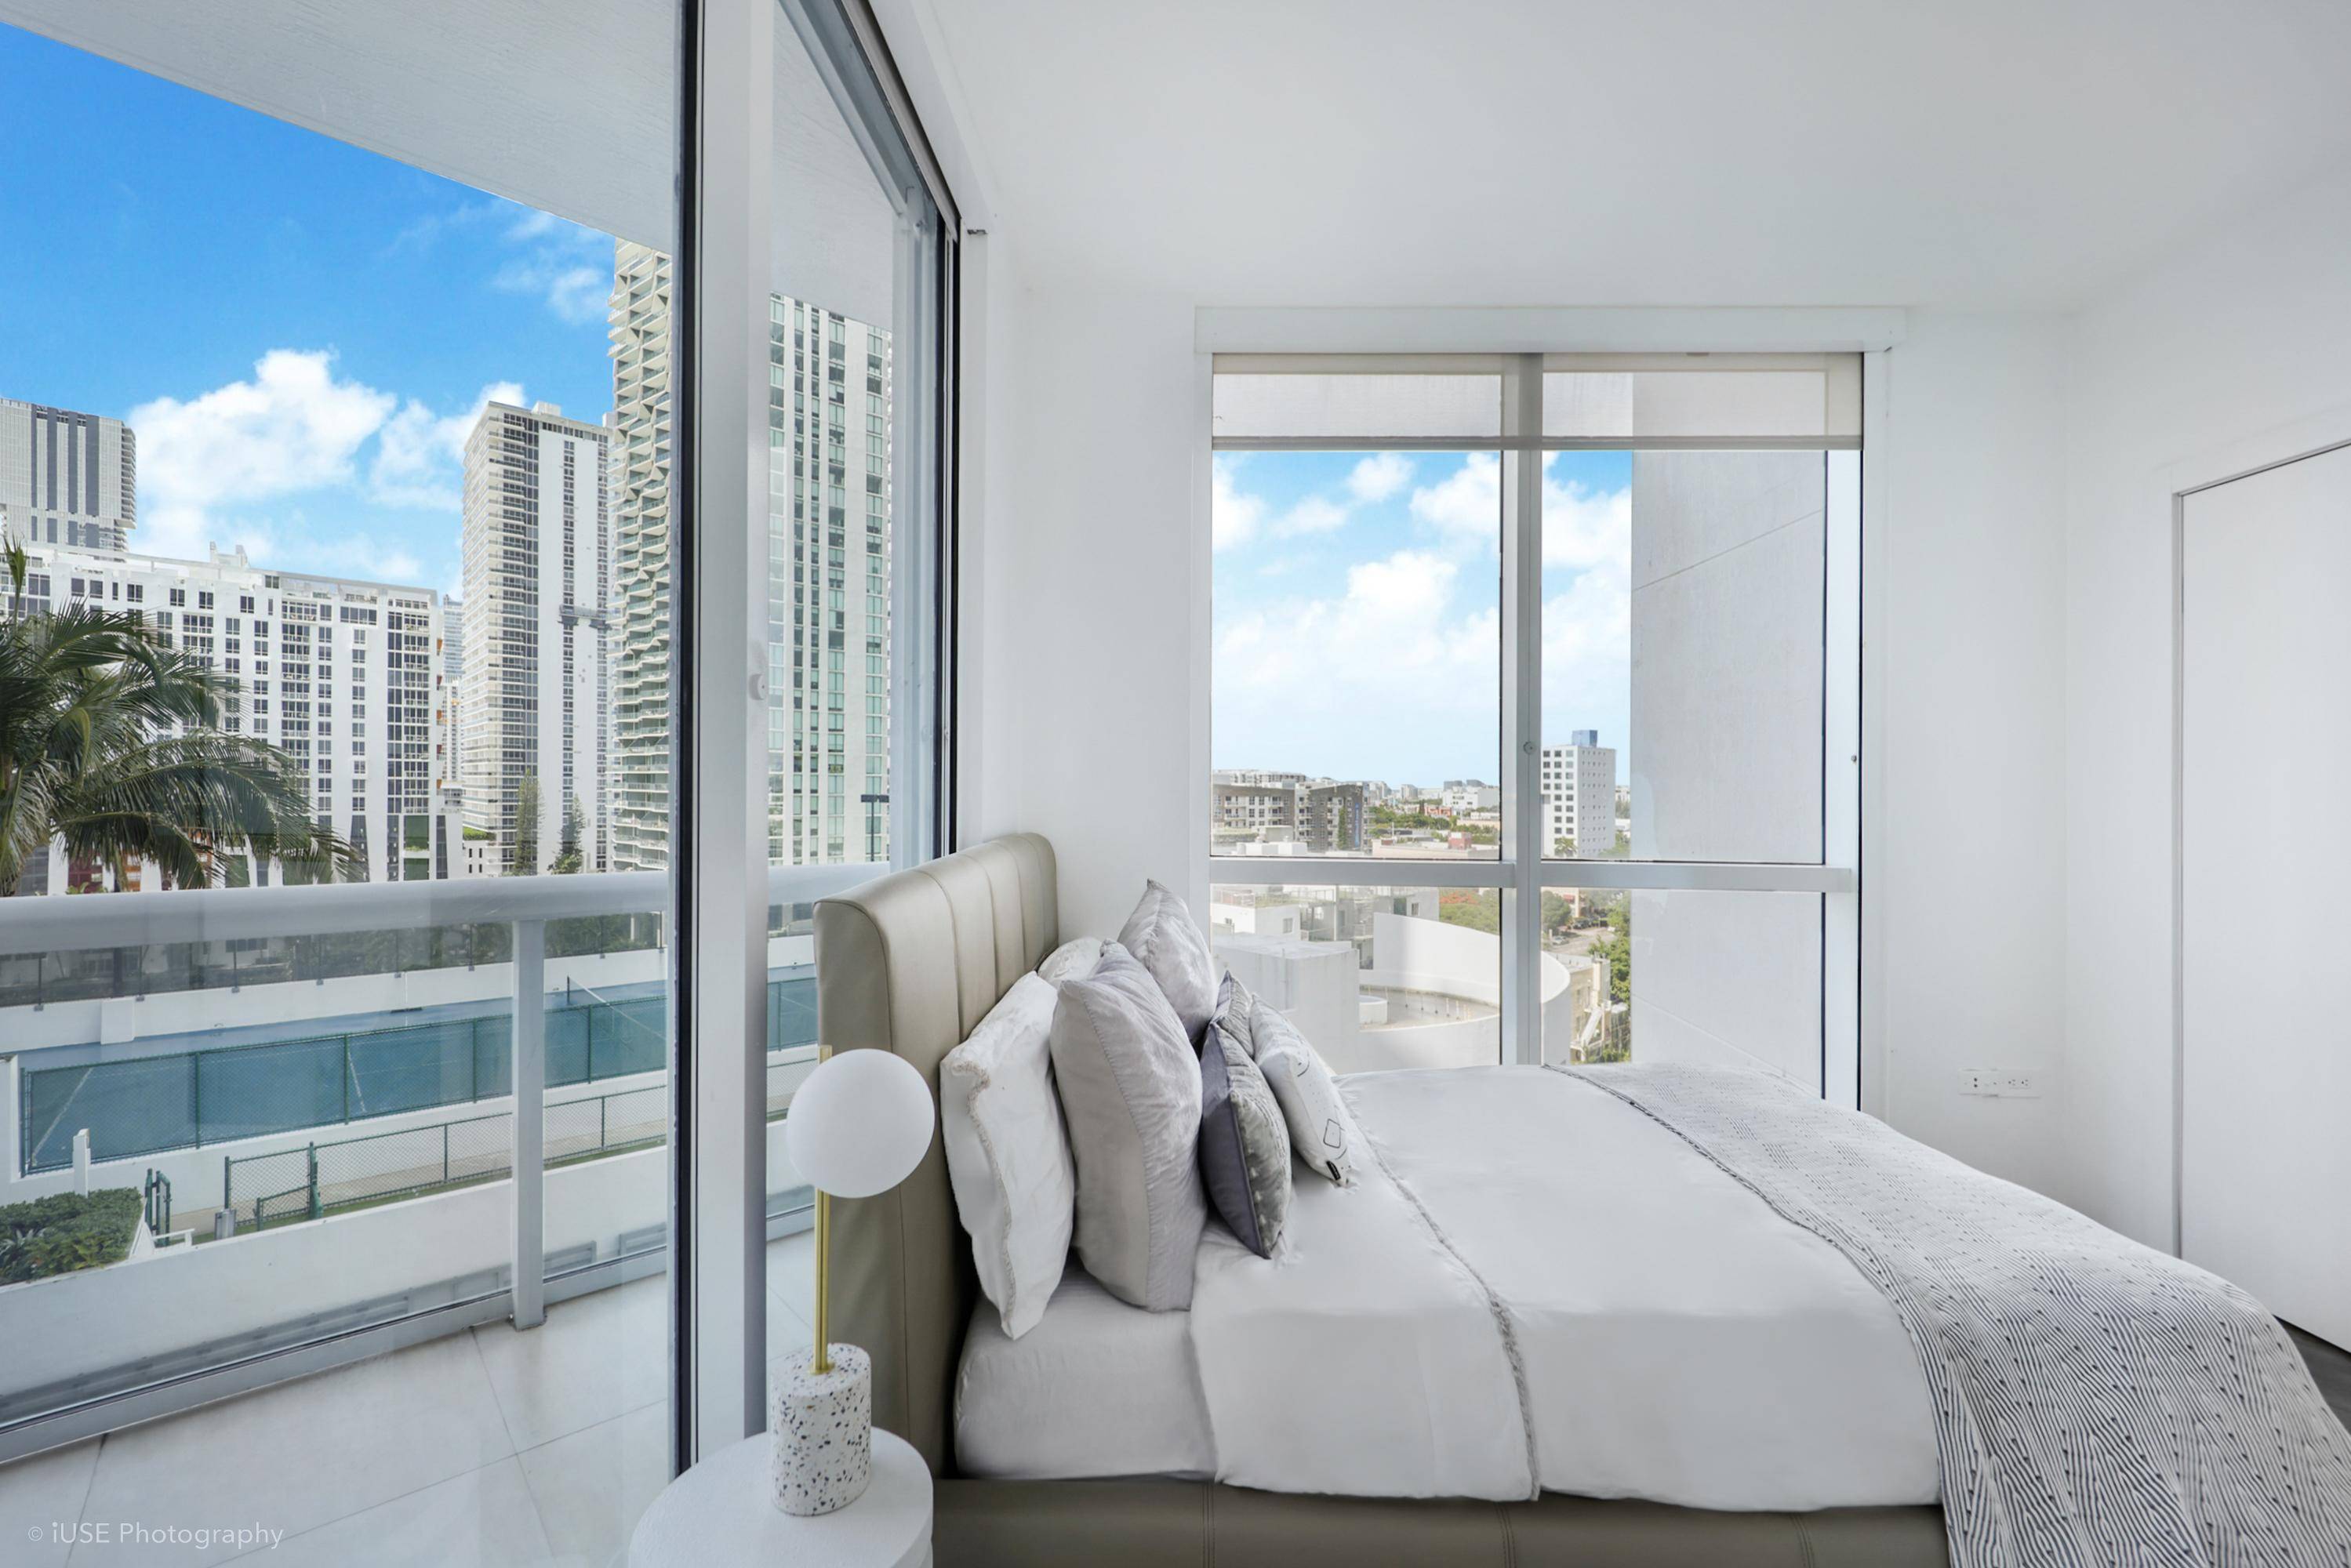 Miami Waterview Condo | Remodeled | 2 Bed, 2 Bath | 1,007 Sqft | $710K